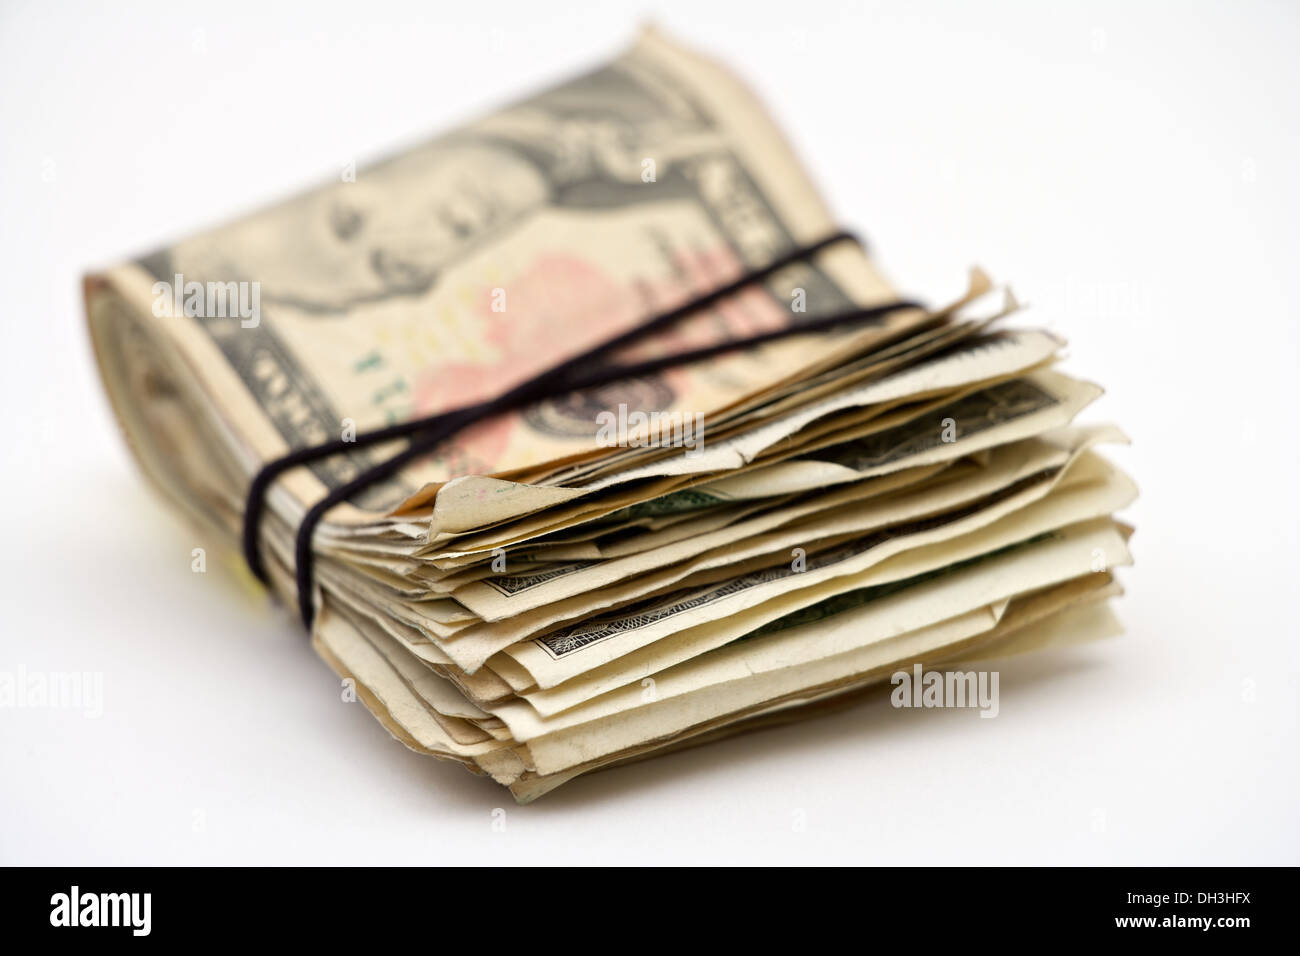 Closeup of a wad of American money tied together with a rubber band Stock Photo